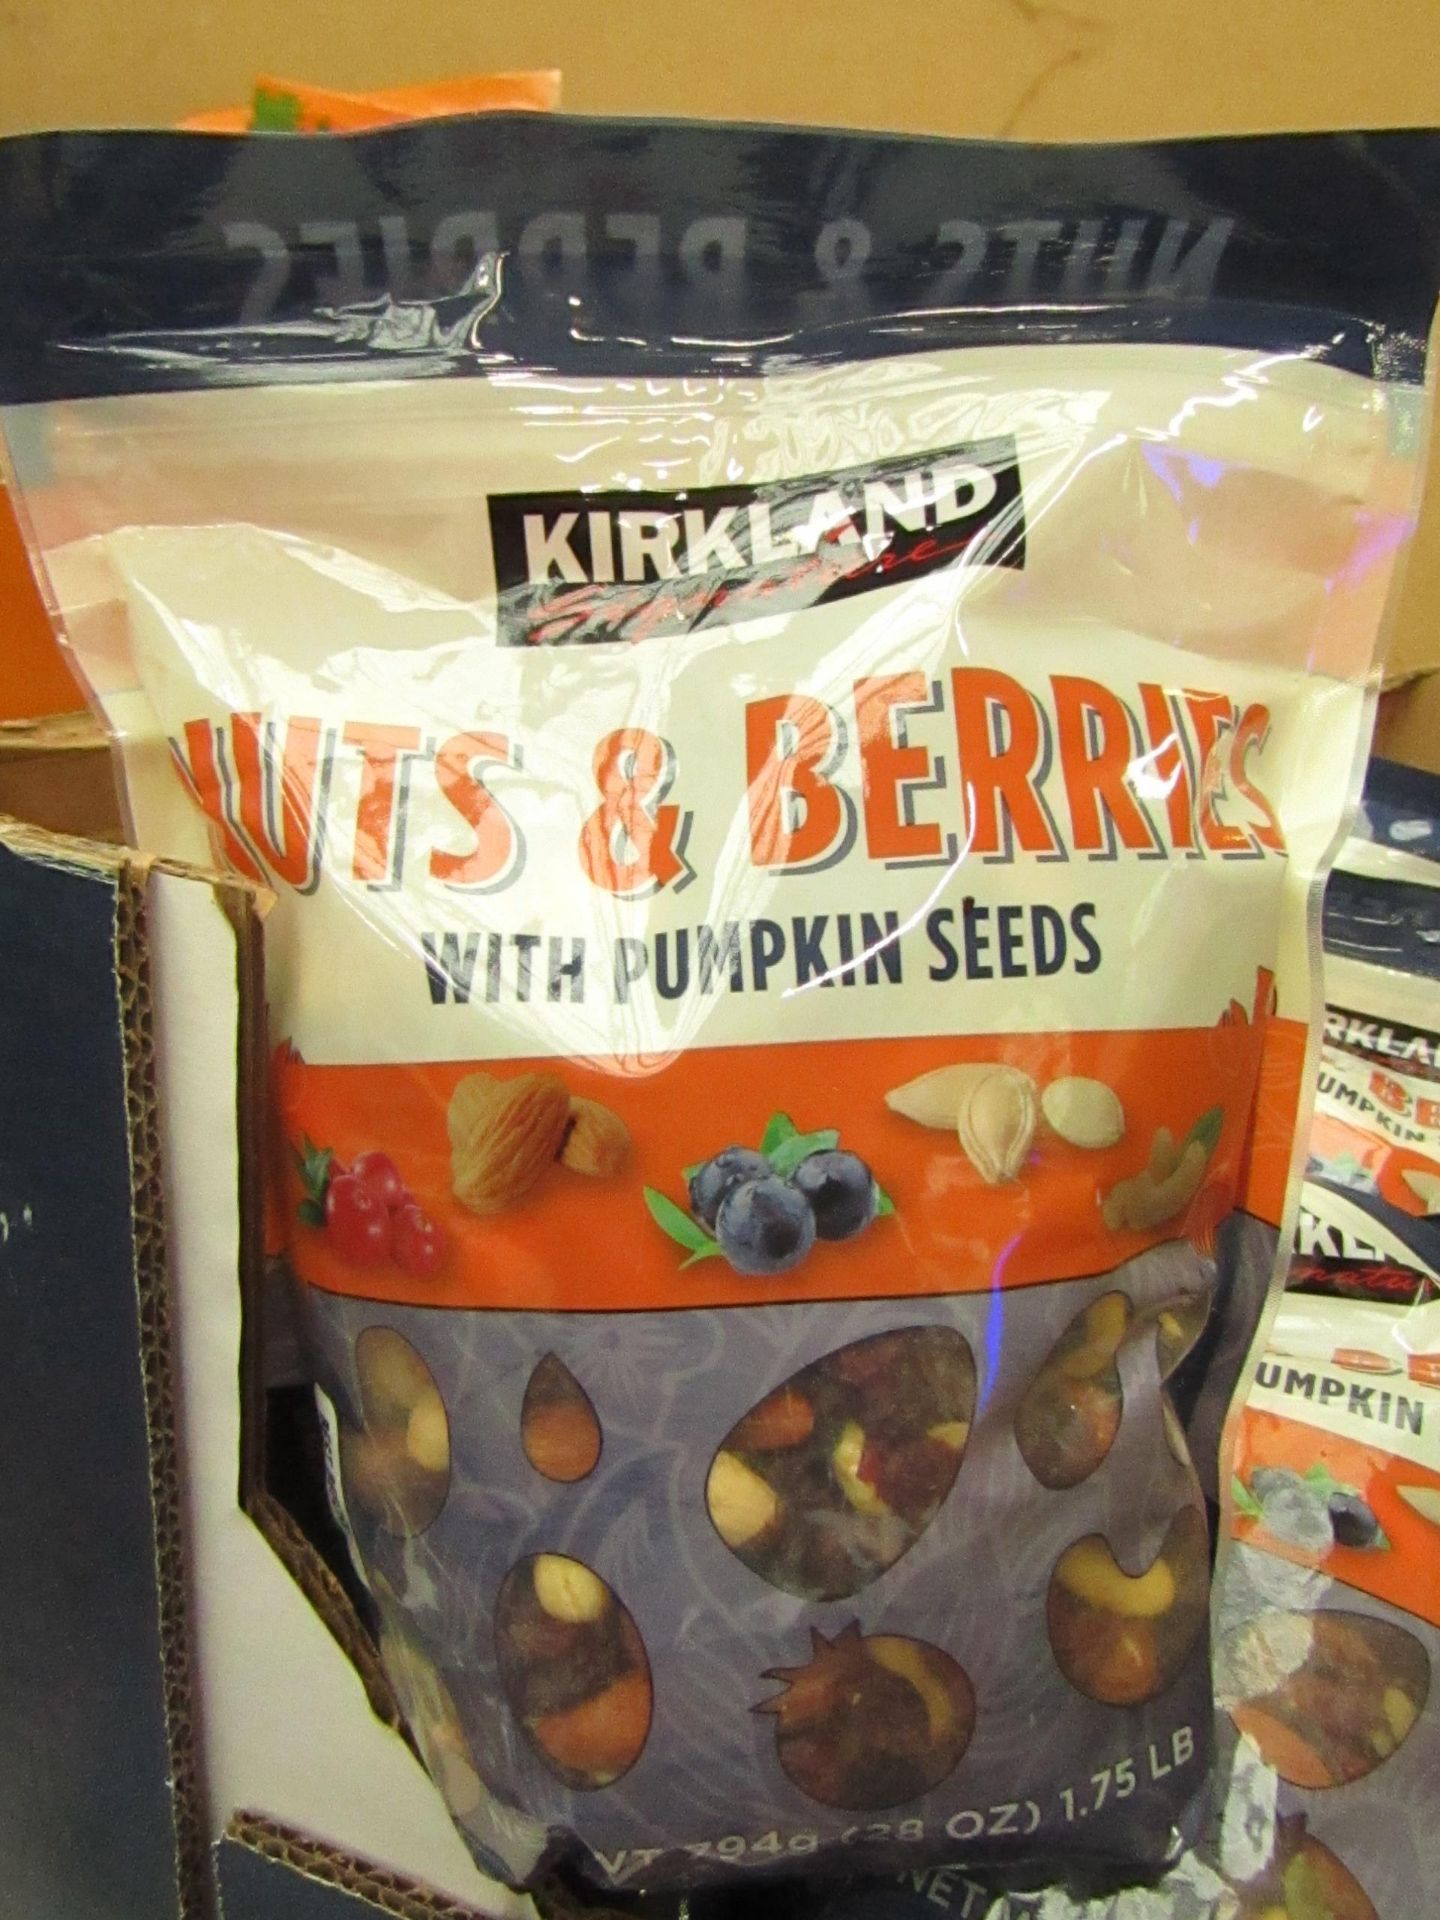 Kirkland - Nuts & Berries with Pumpin Seeds - BB 03/03/20.